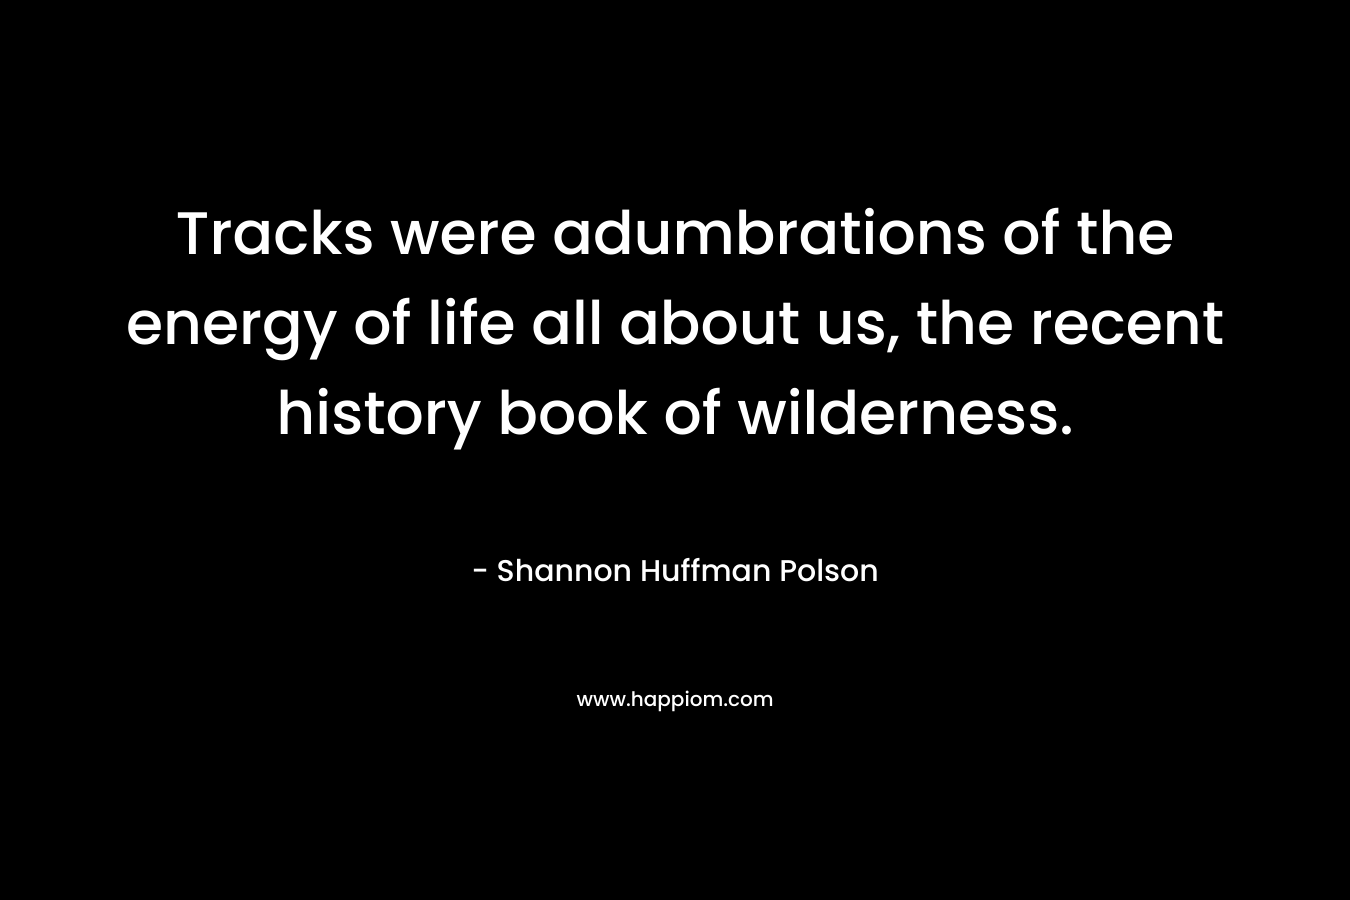 Tracks were adumbrations of the energy of life all about us, the recent history book of wilderness. – Shannon Huffman Polson